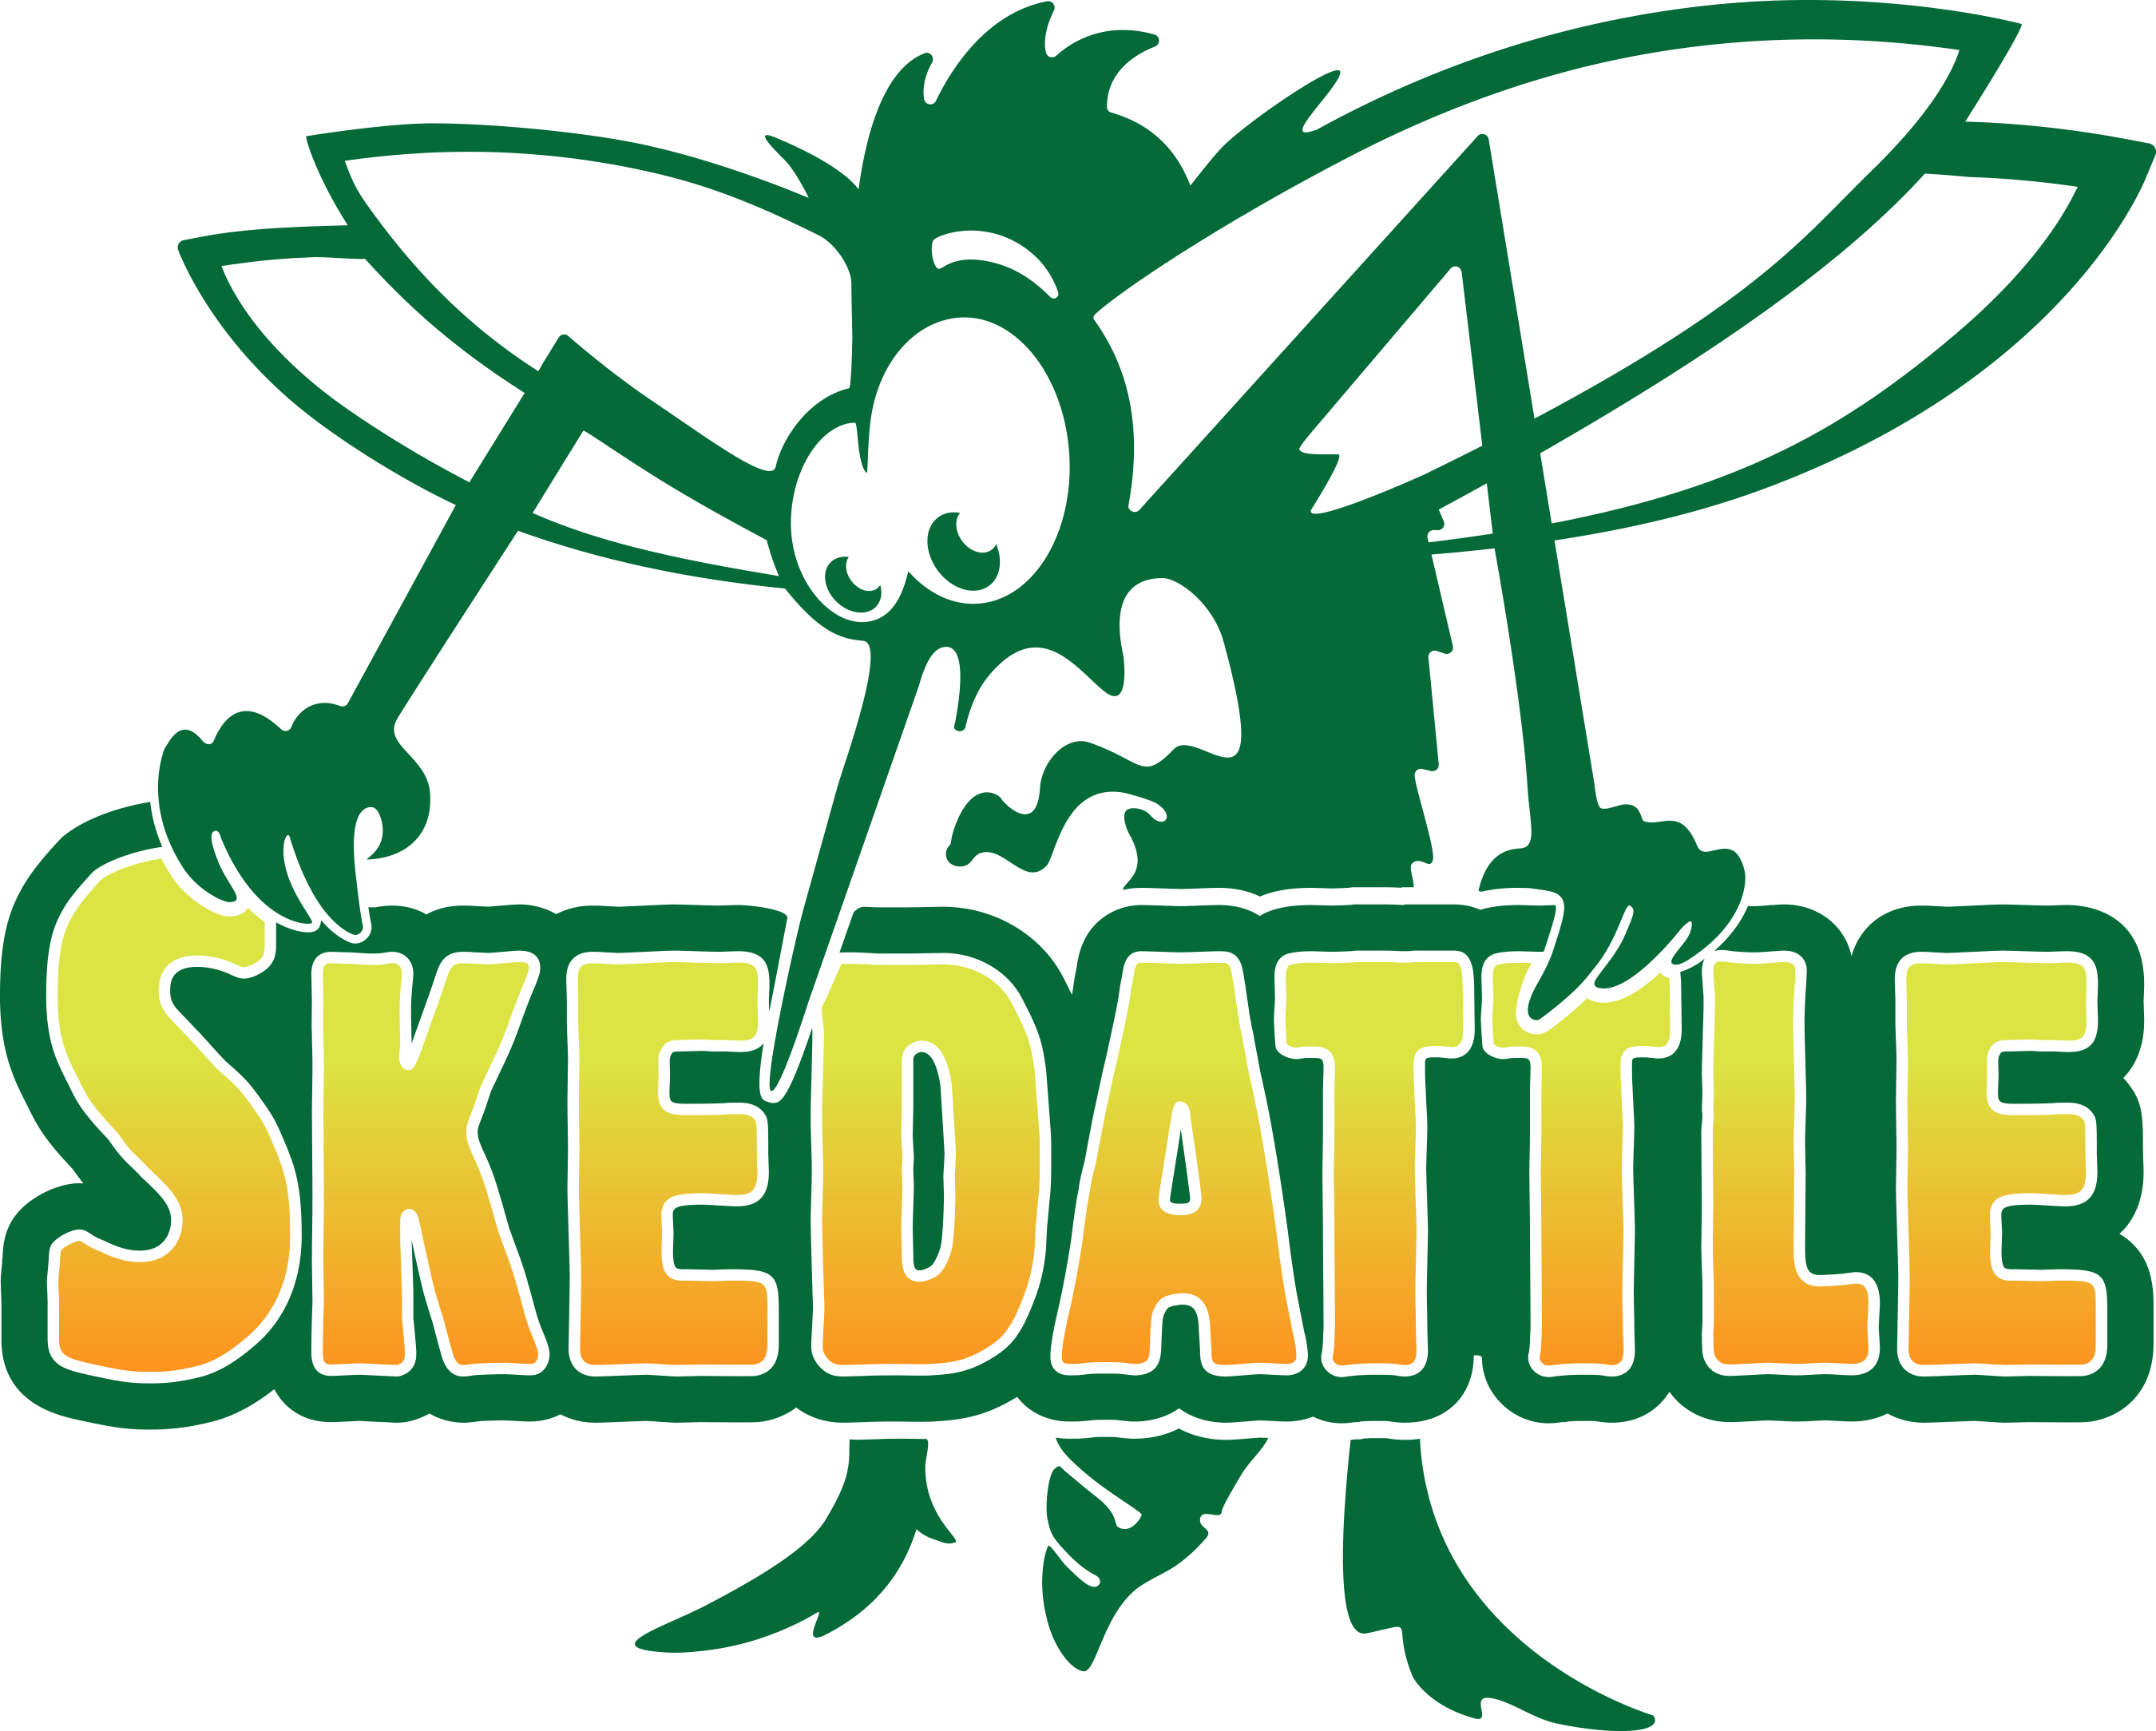 Skedattle elements brands another. Mosquito clipart harm